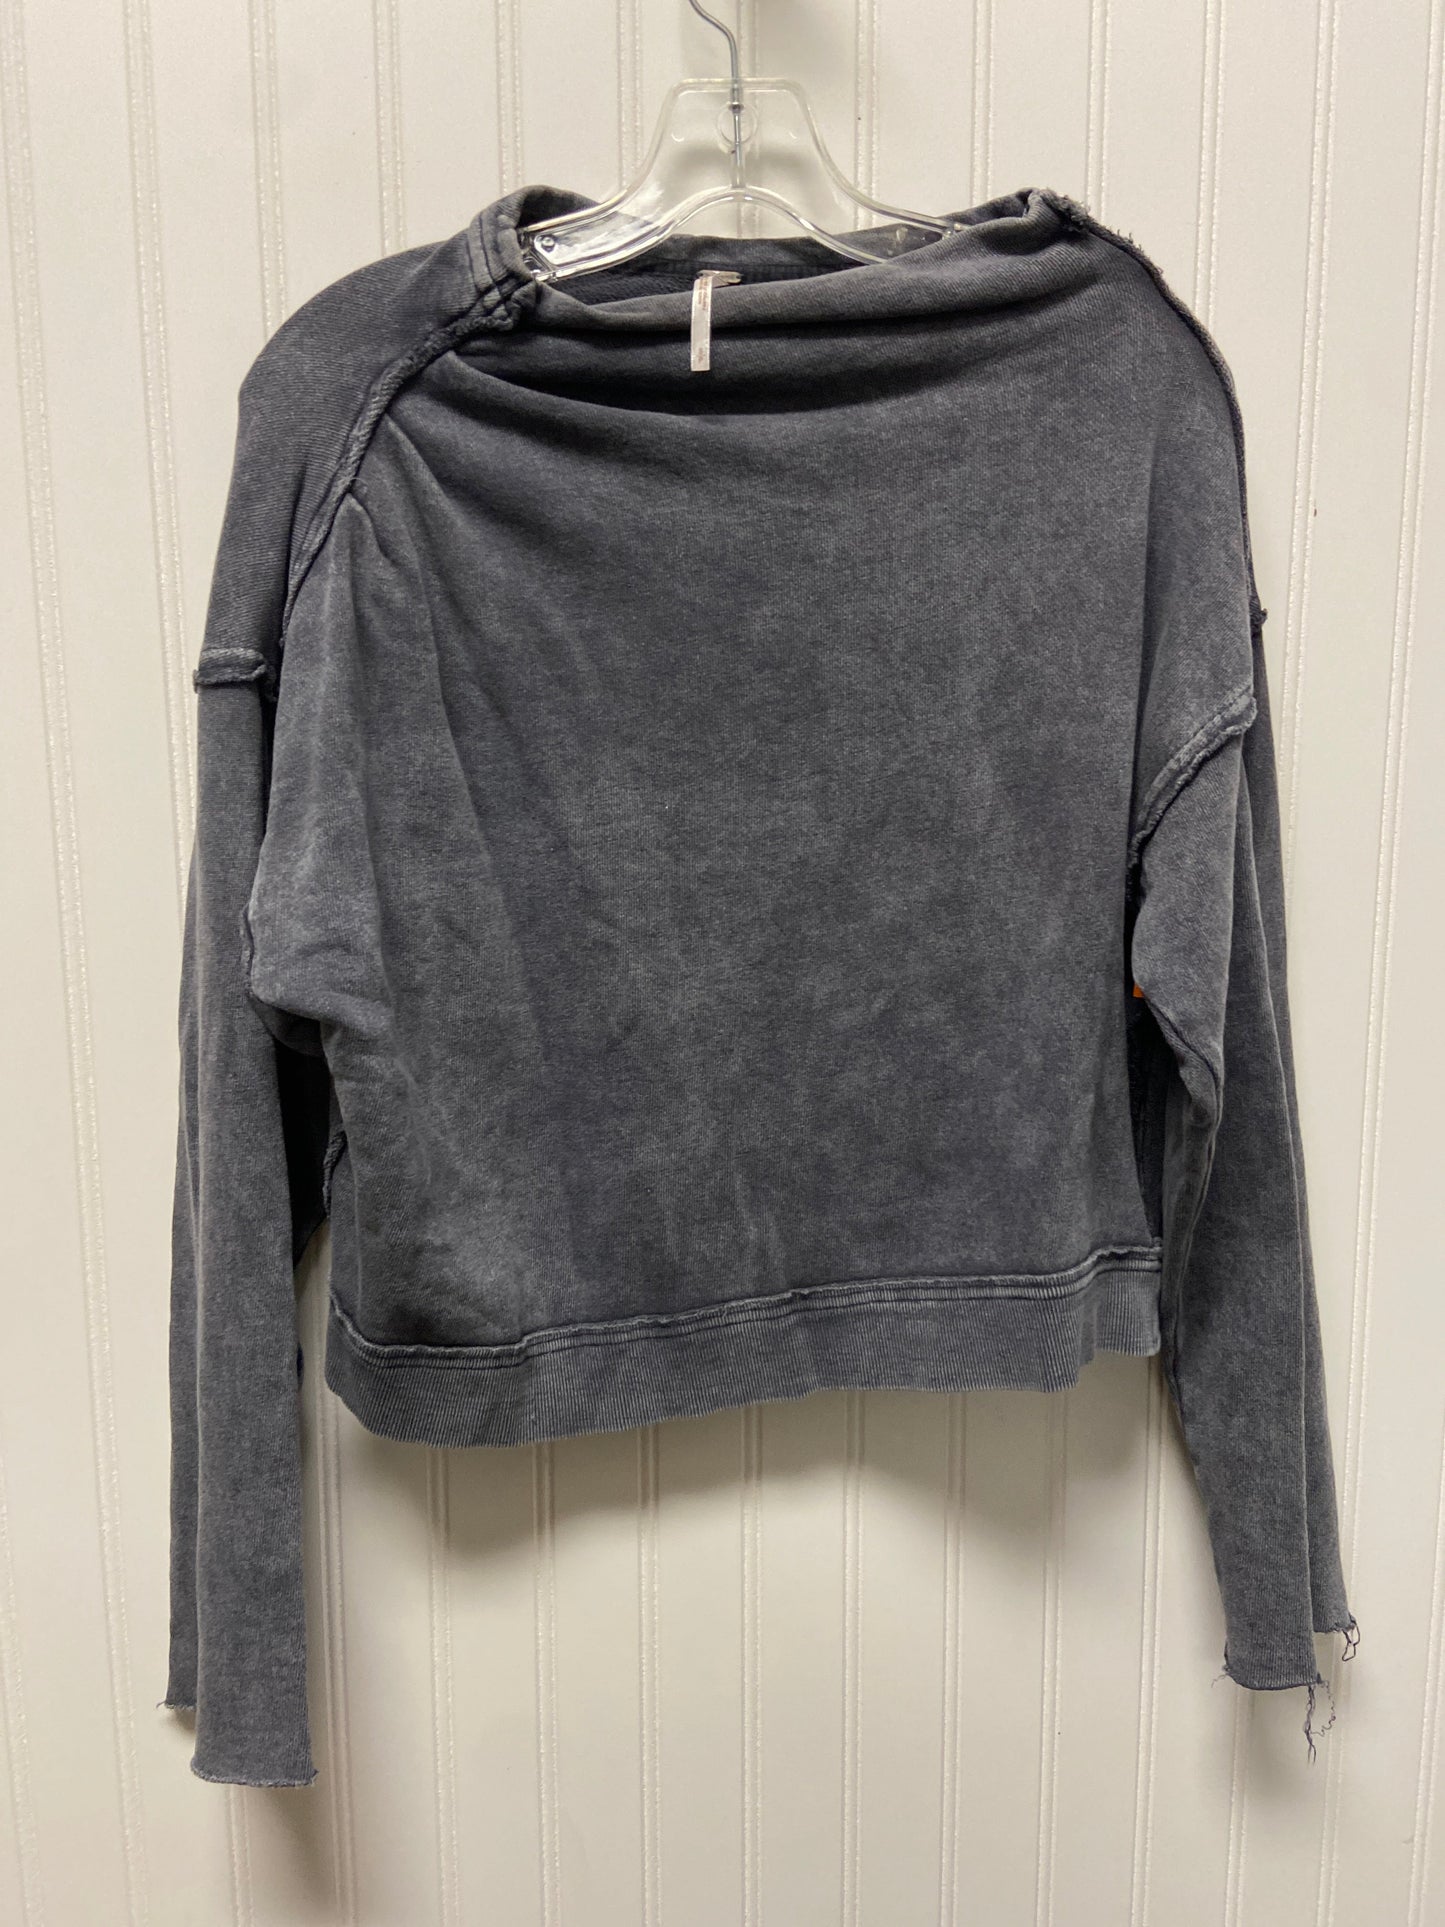 Charcoal Top Long Sleeve Free People, Size Petite   Small